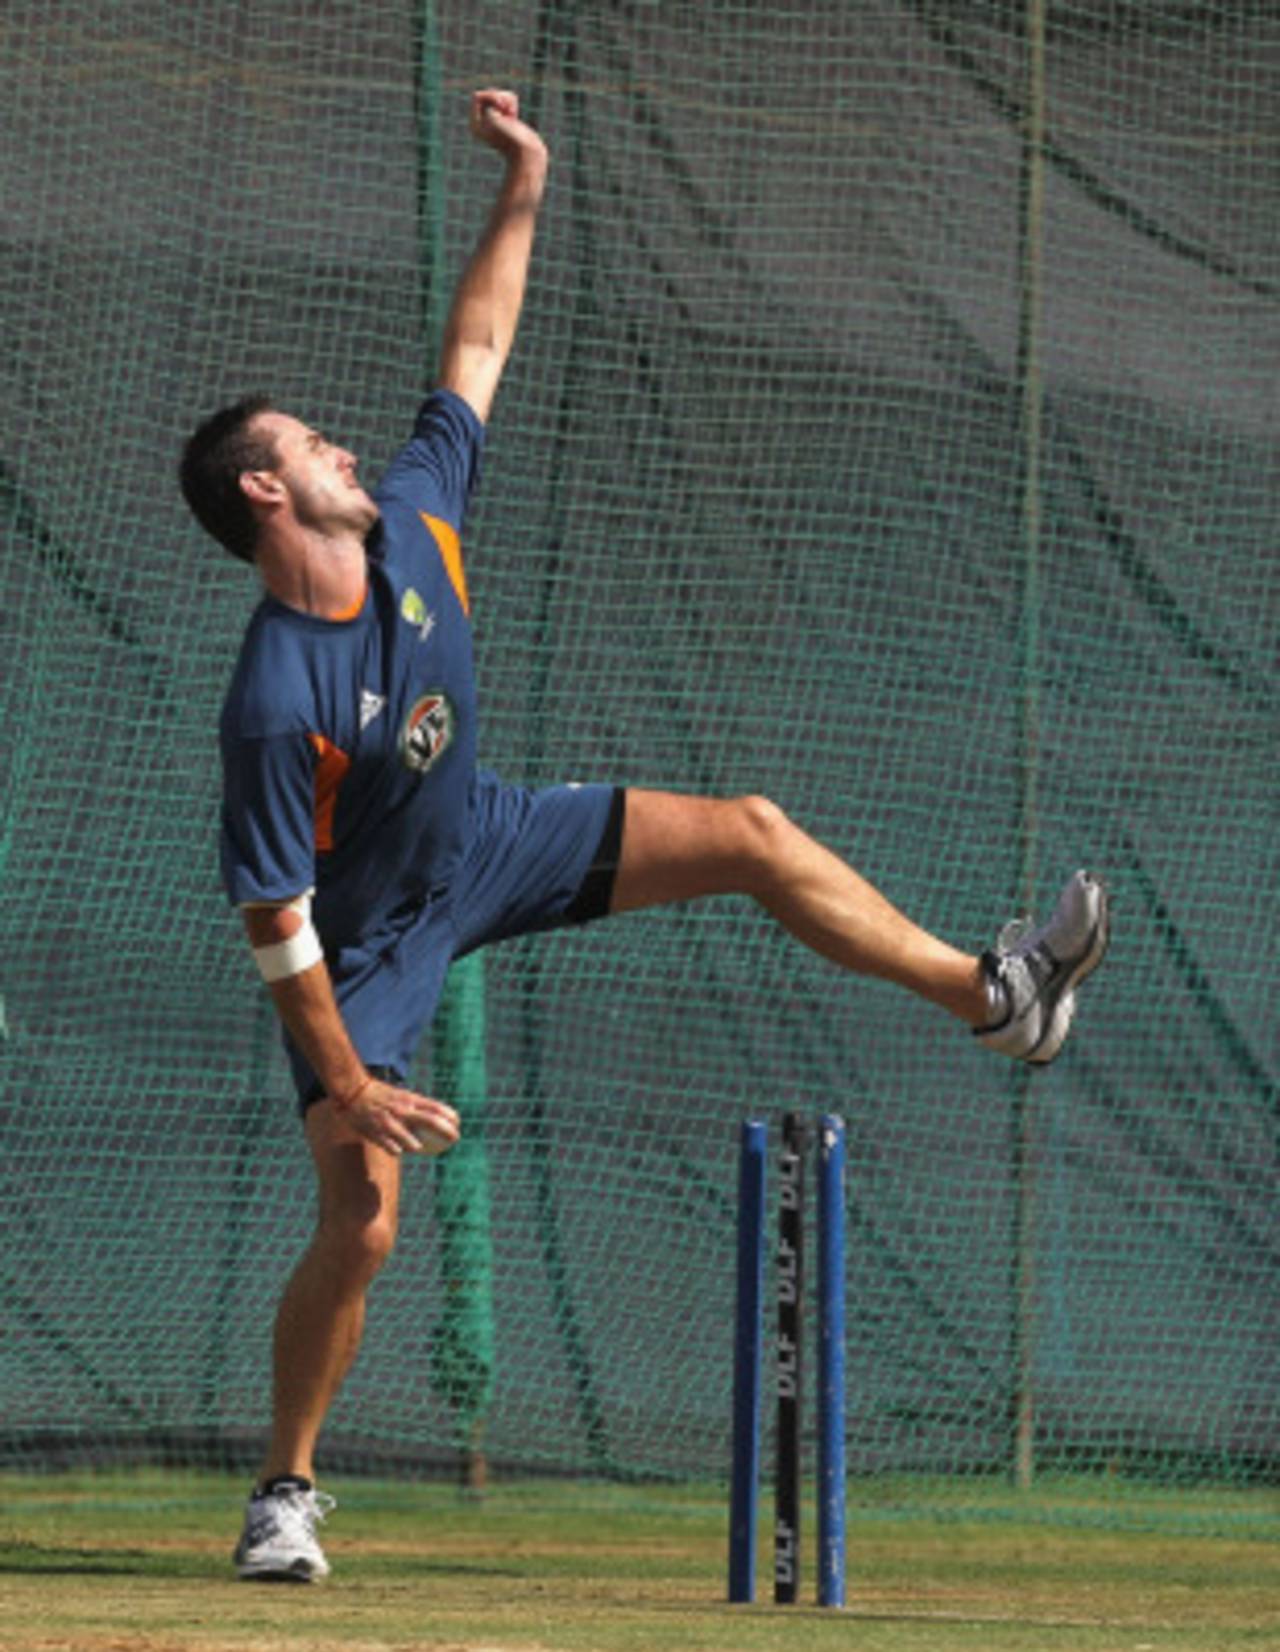 Shaun Tait bowls in the nets, Ahmedabad, March 22, 2011